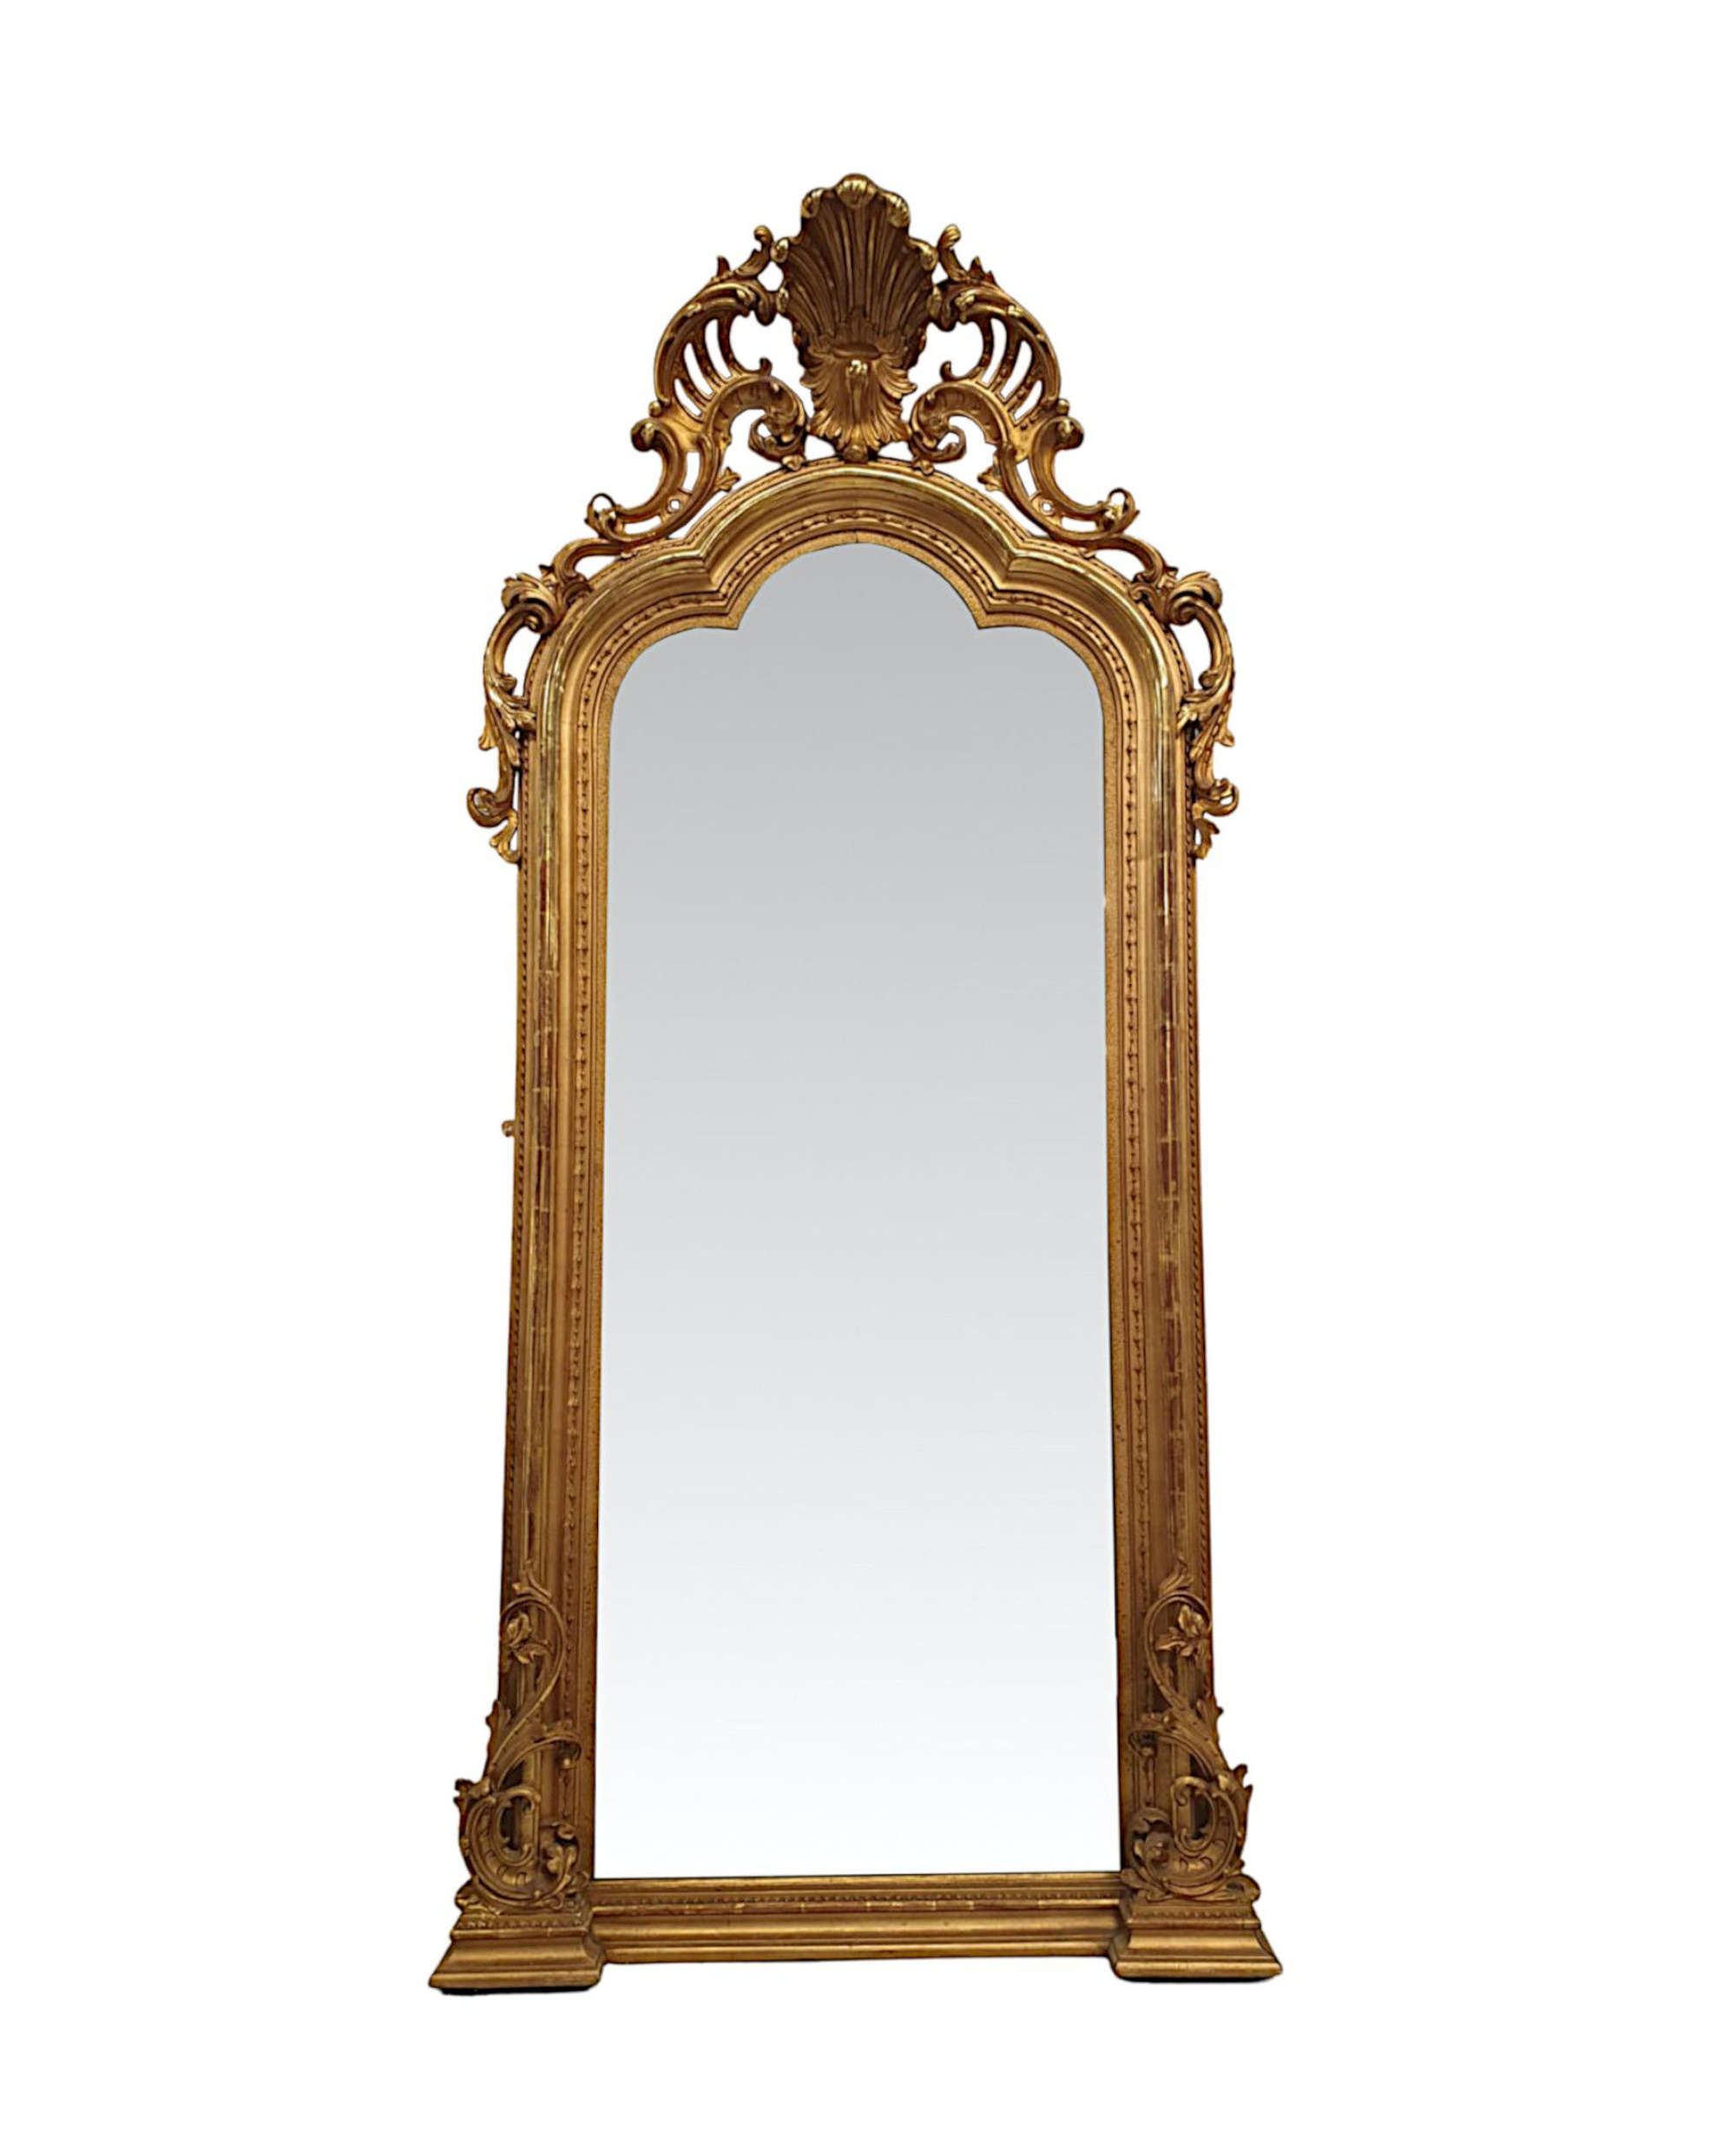 A Fabulous Large 19th Century Giltwood Hall or Pier or Dressing Mirror